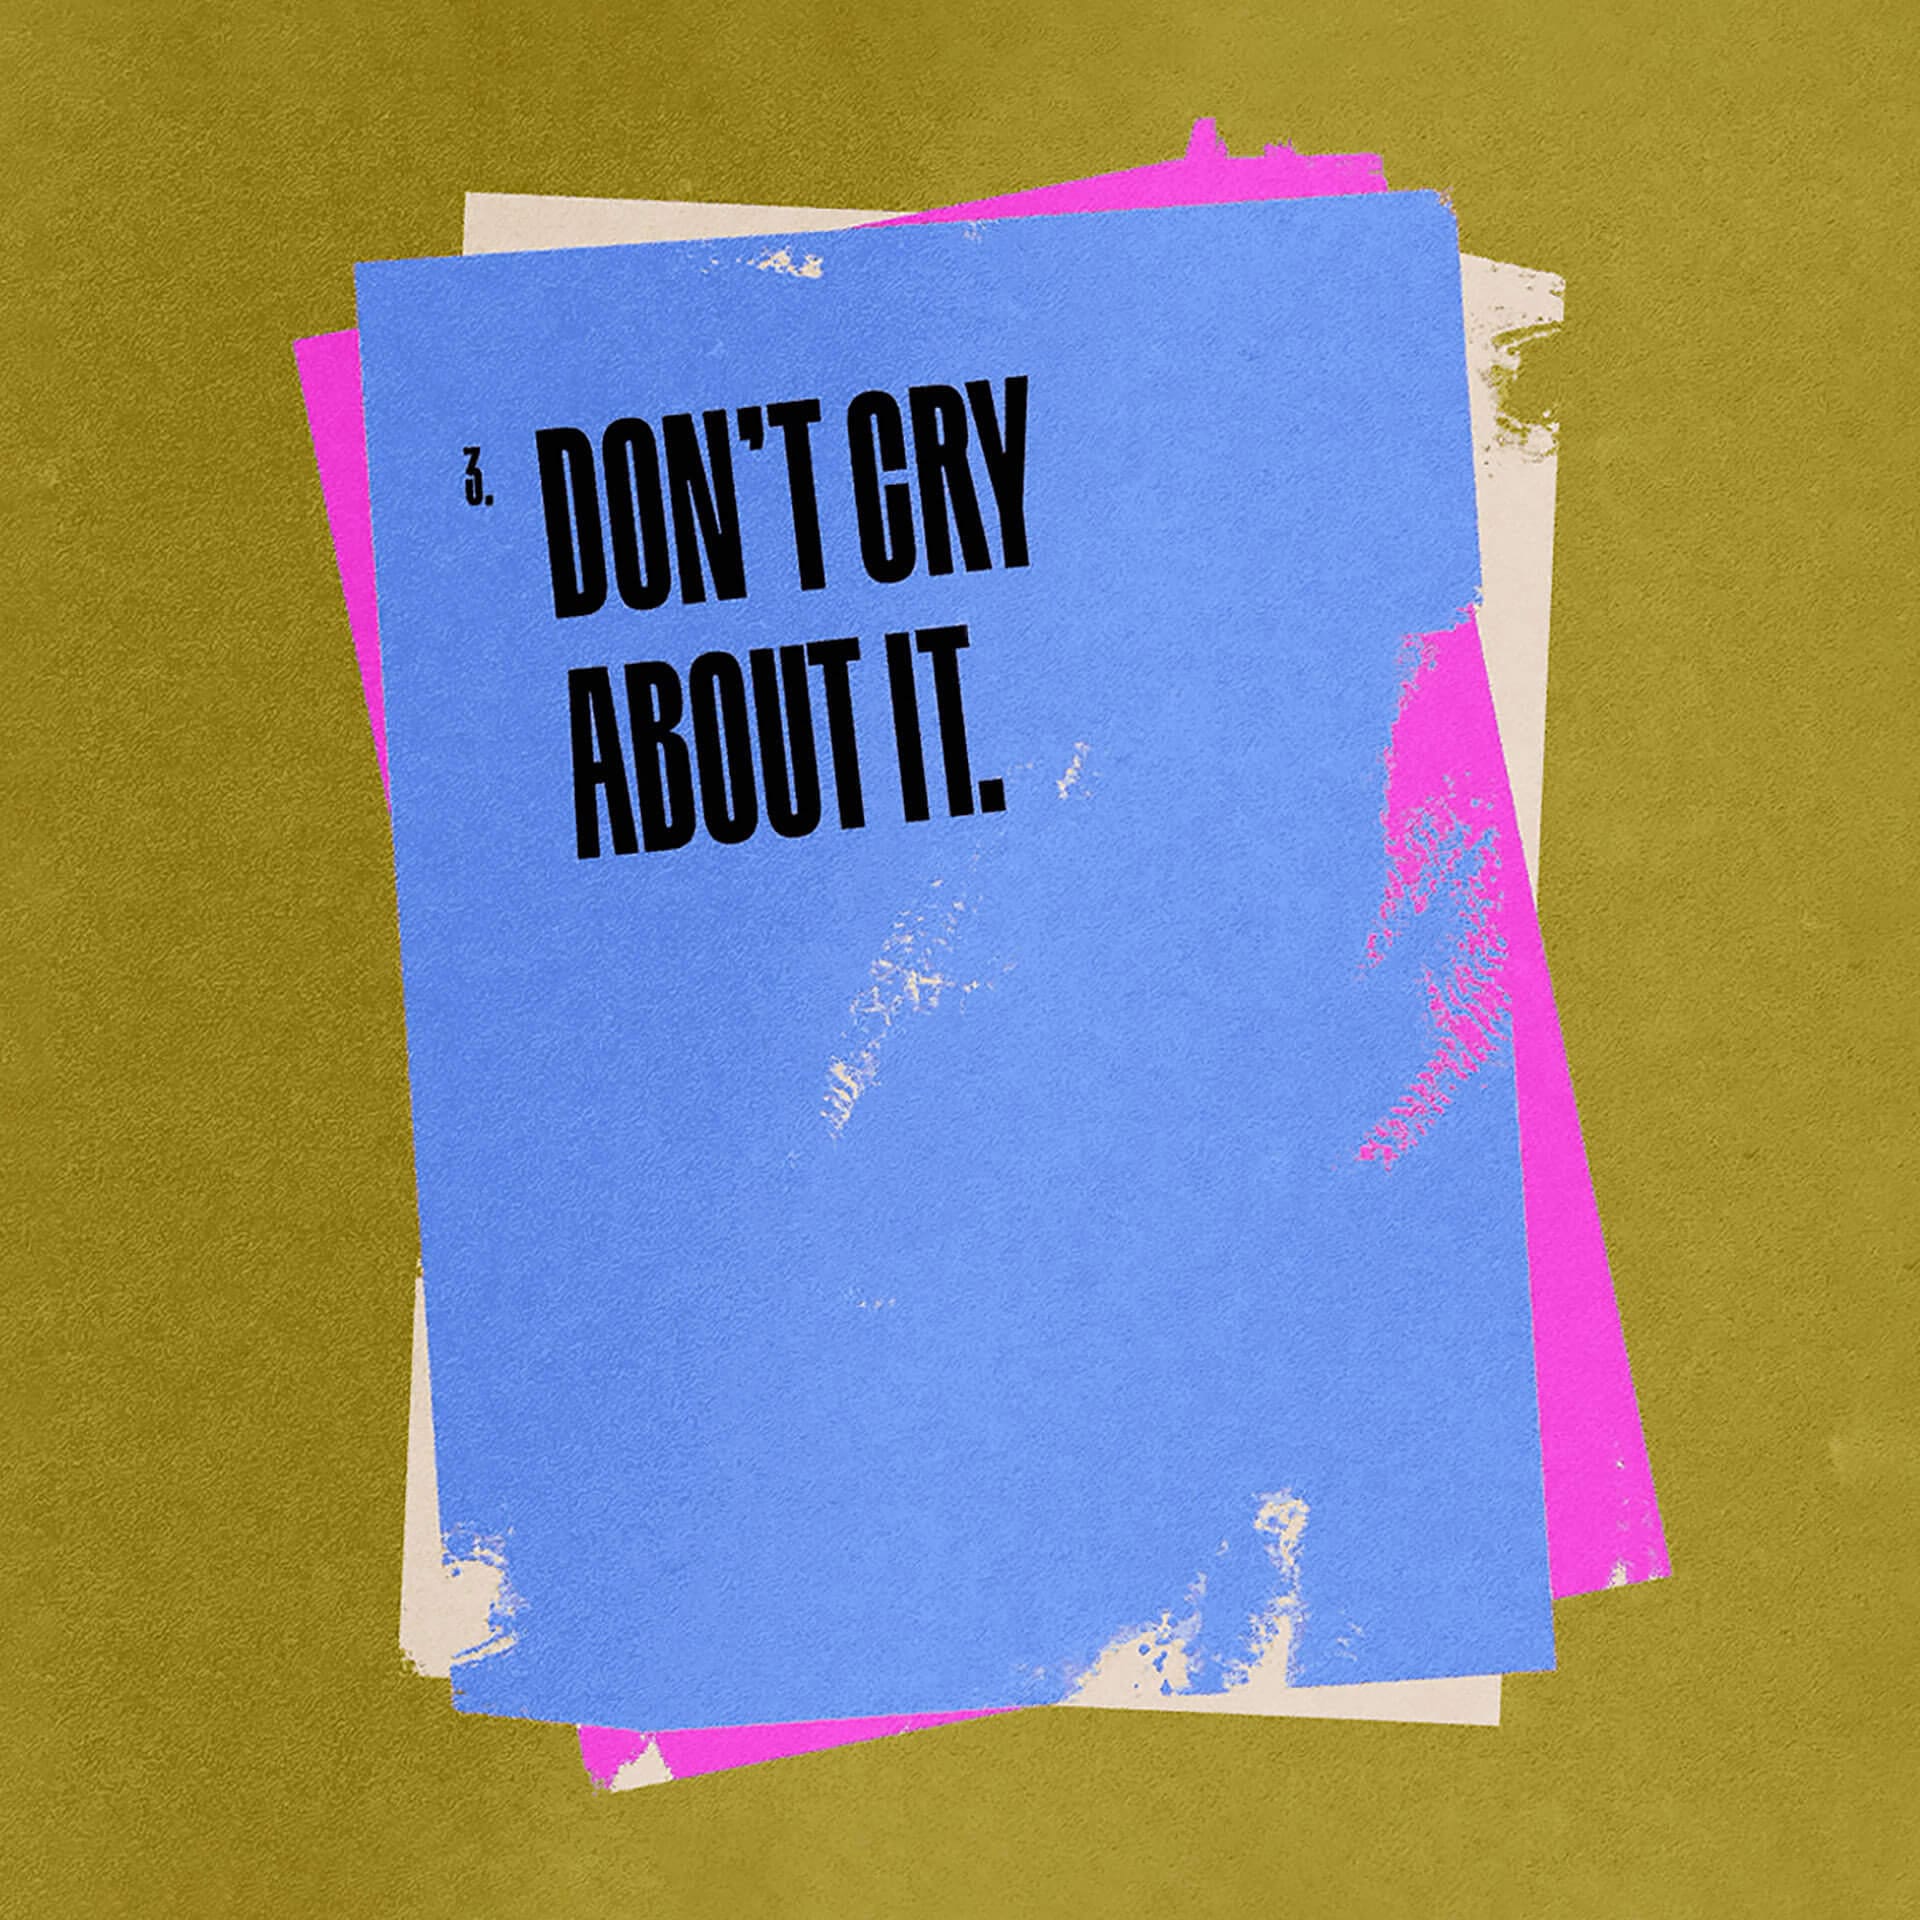 Digital image of three posters on top of each other against a dark gold background. The bottom poster is white, the middle is pink, and the top is blue with bold black text that says "Don't cry about it."